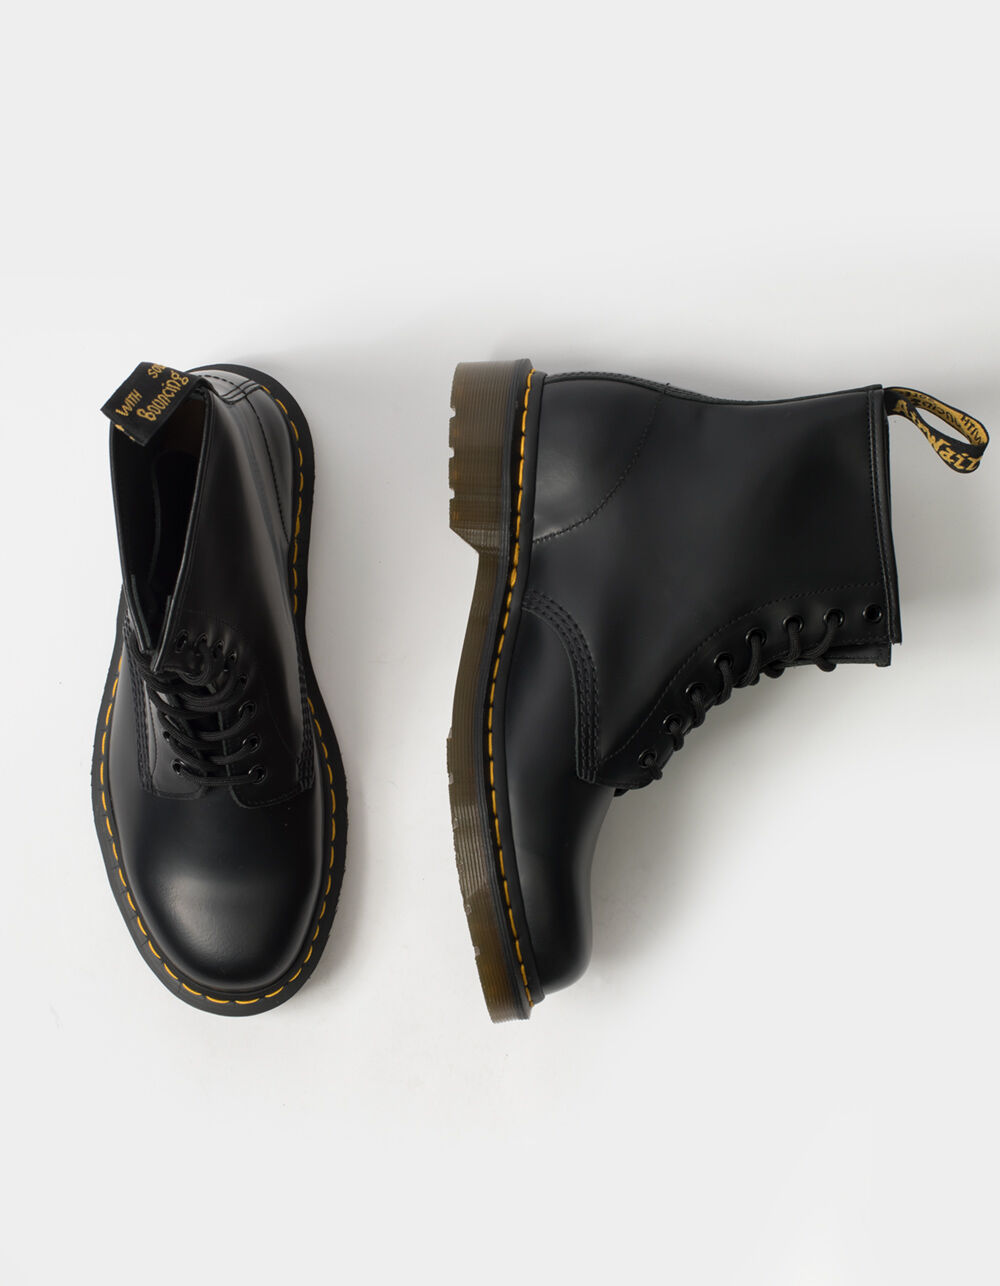 8 Cool Ways to Rock Dr Martens Boots